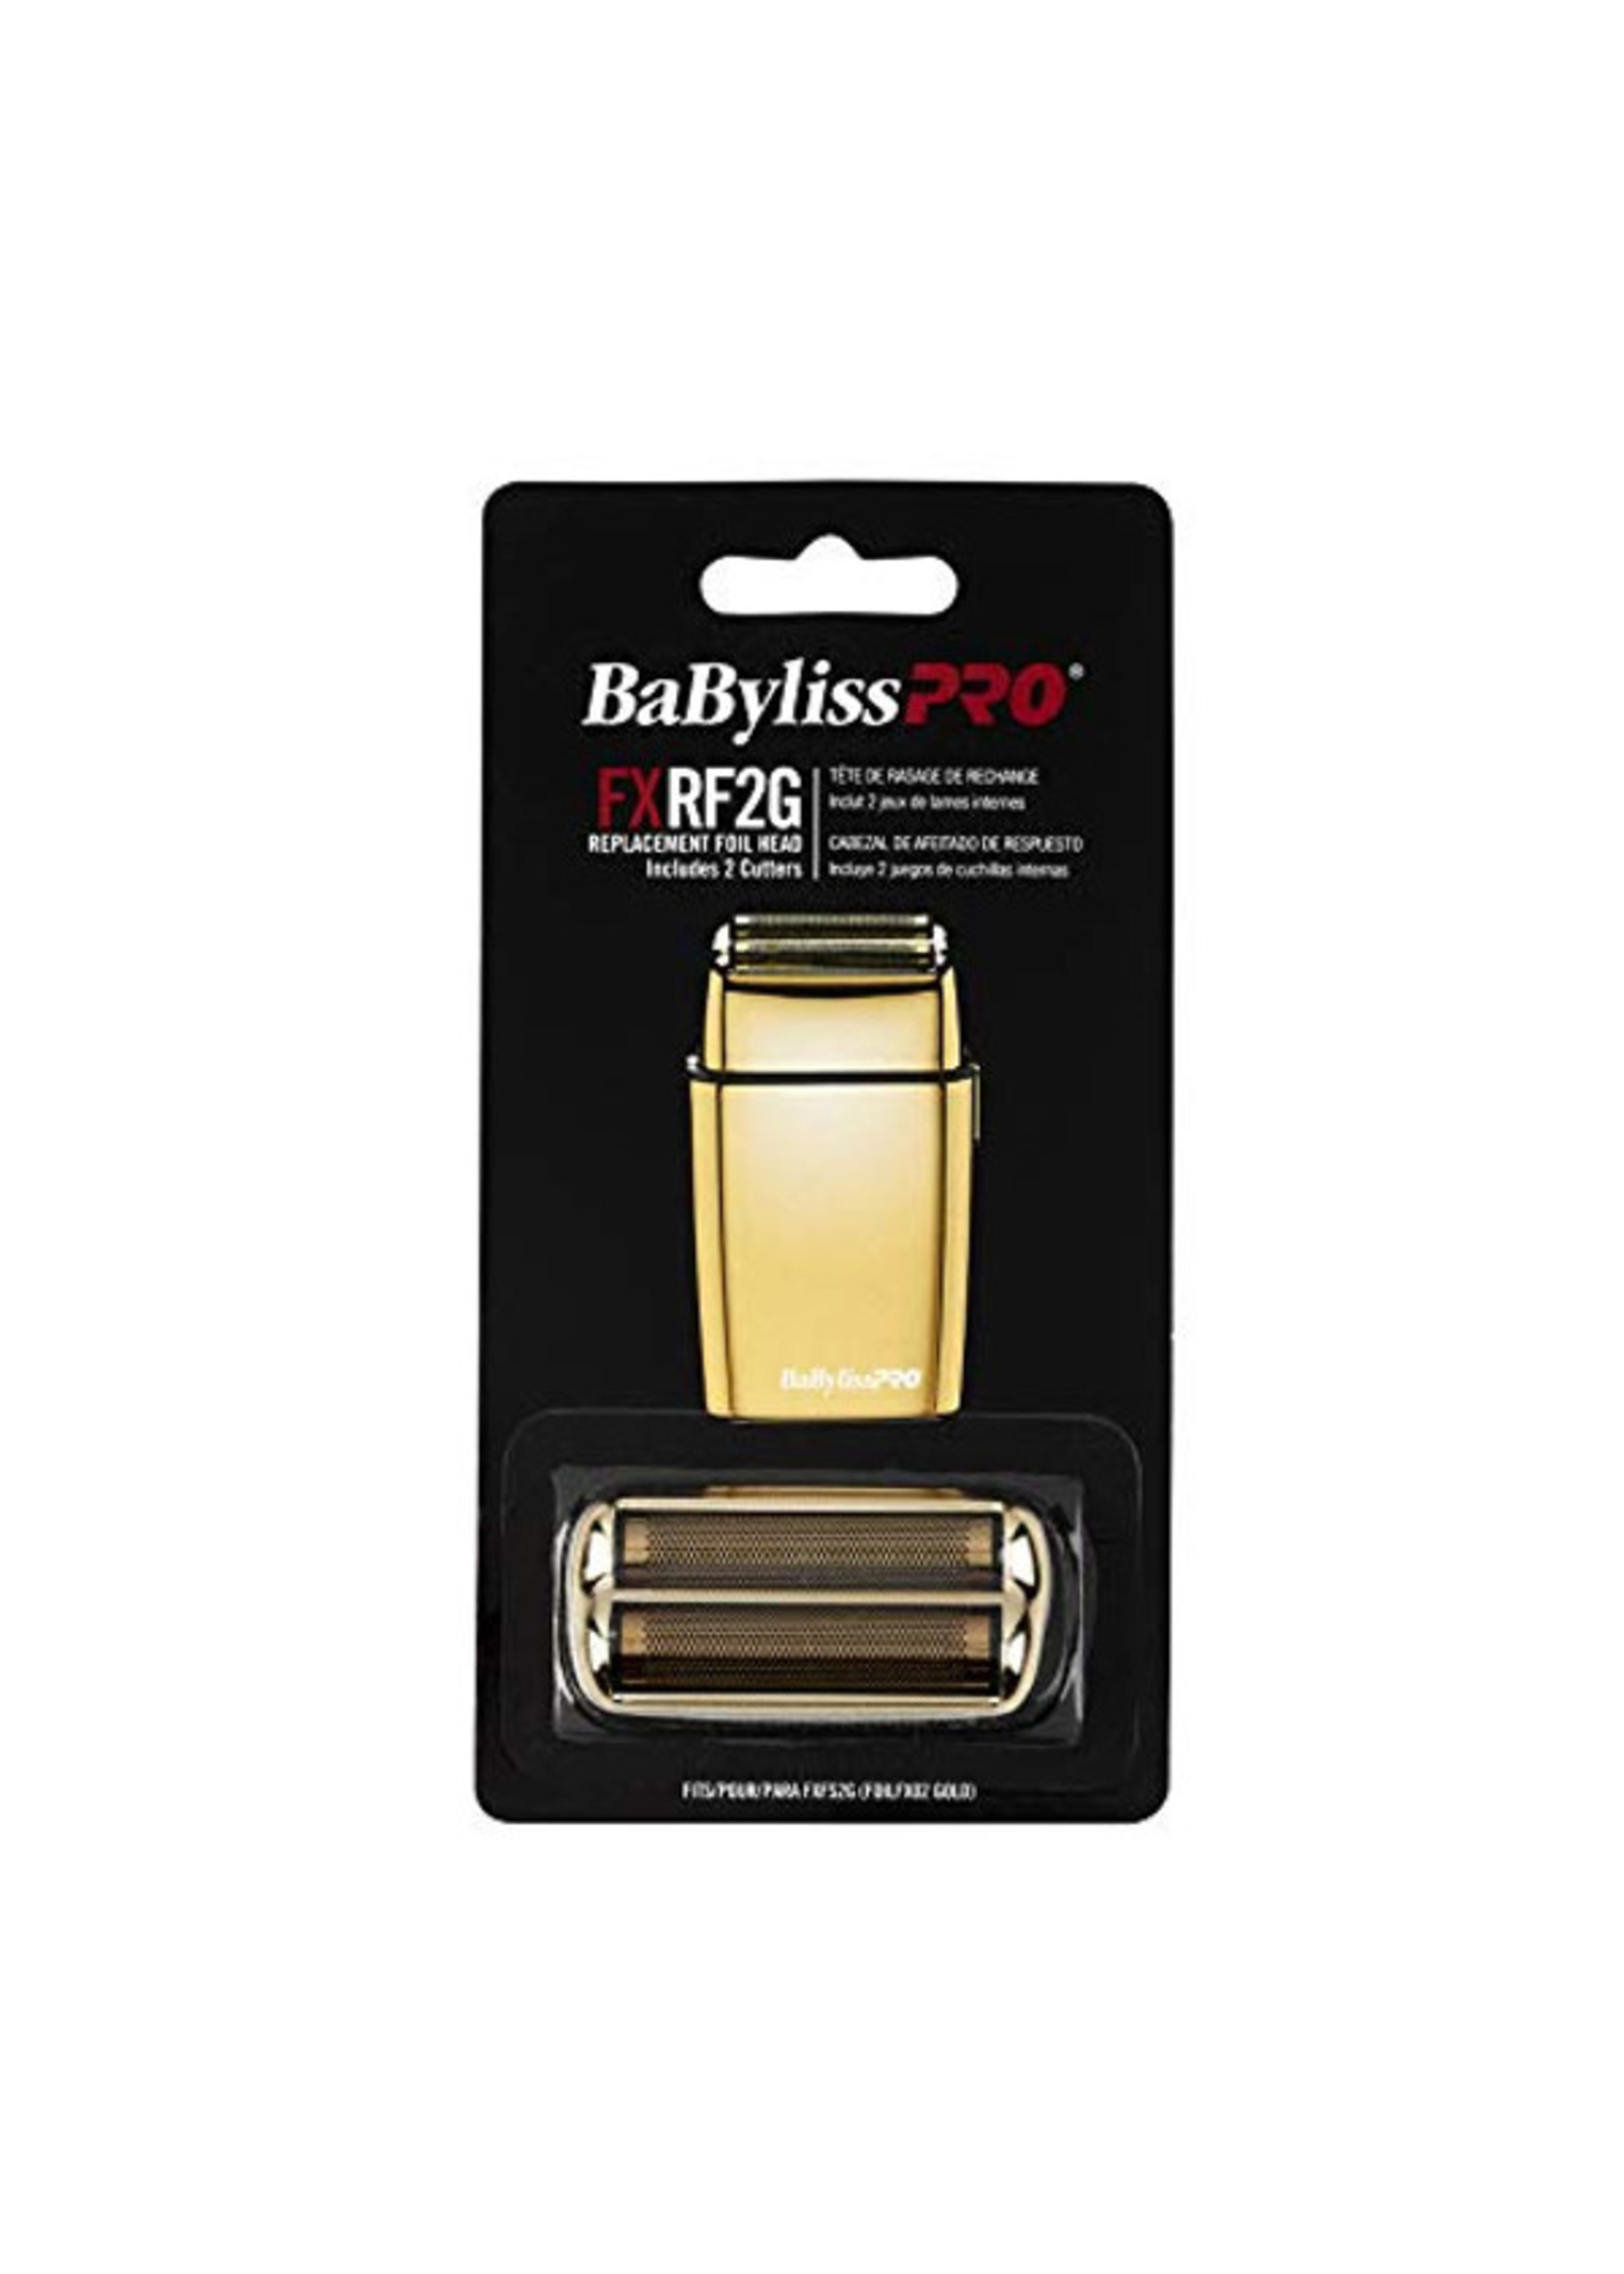 BABYLISS PRO FXRF2G - GRILLE=COUTEAU FXFS2G